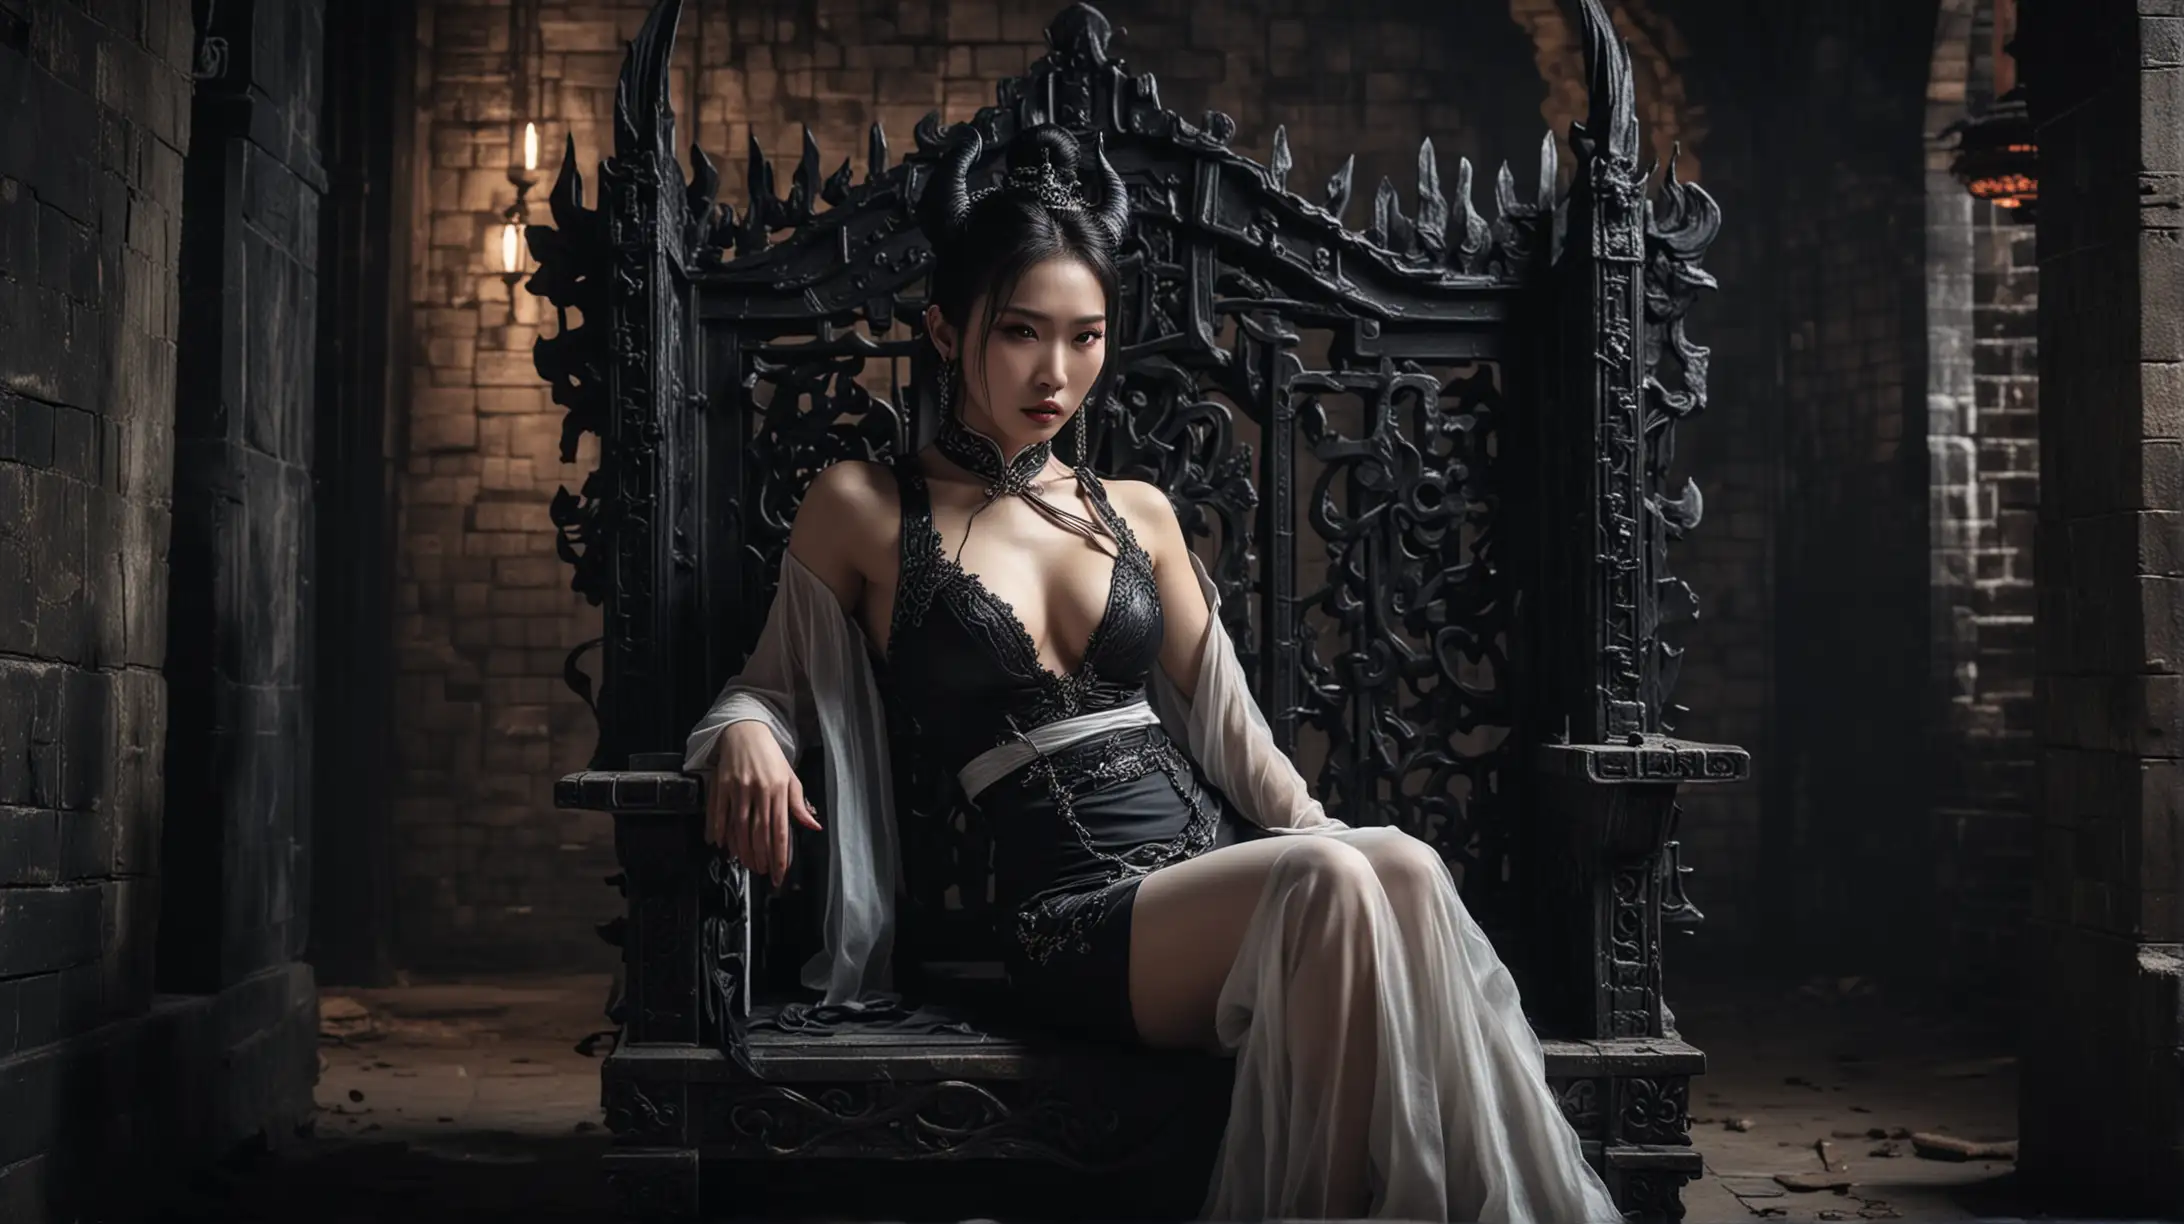 sensual Chinese female demon sitting on a throne in a dungeon chamber, sensual and gothic